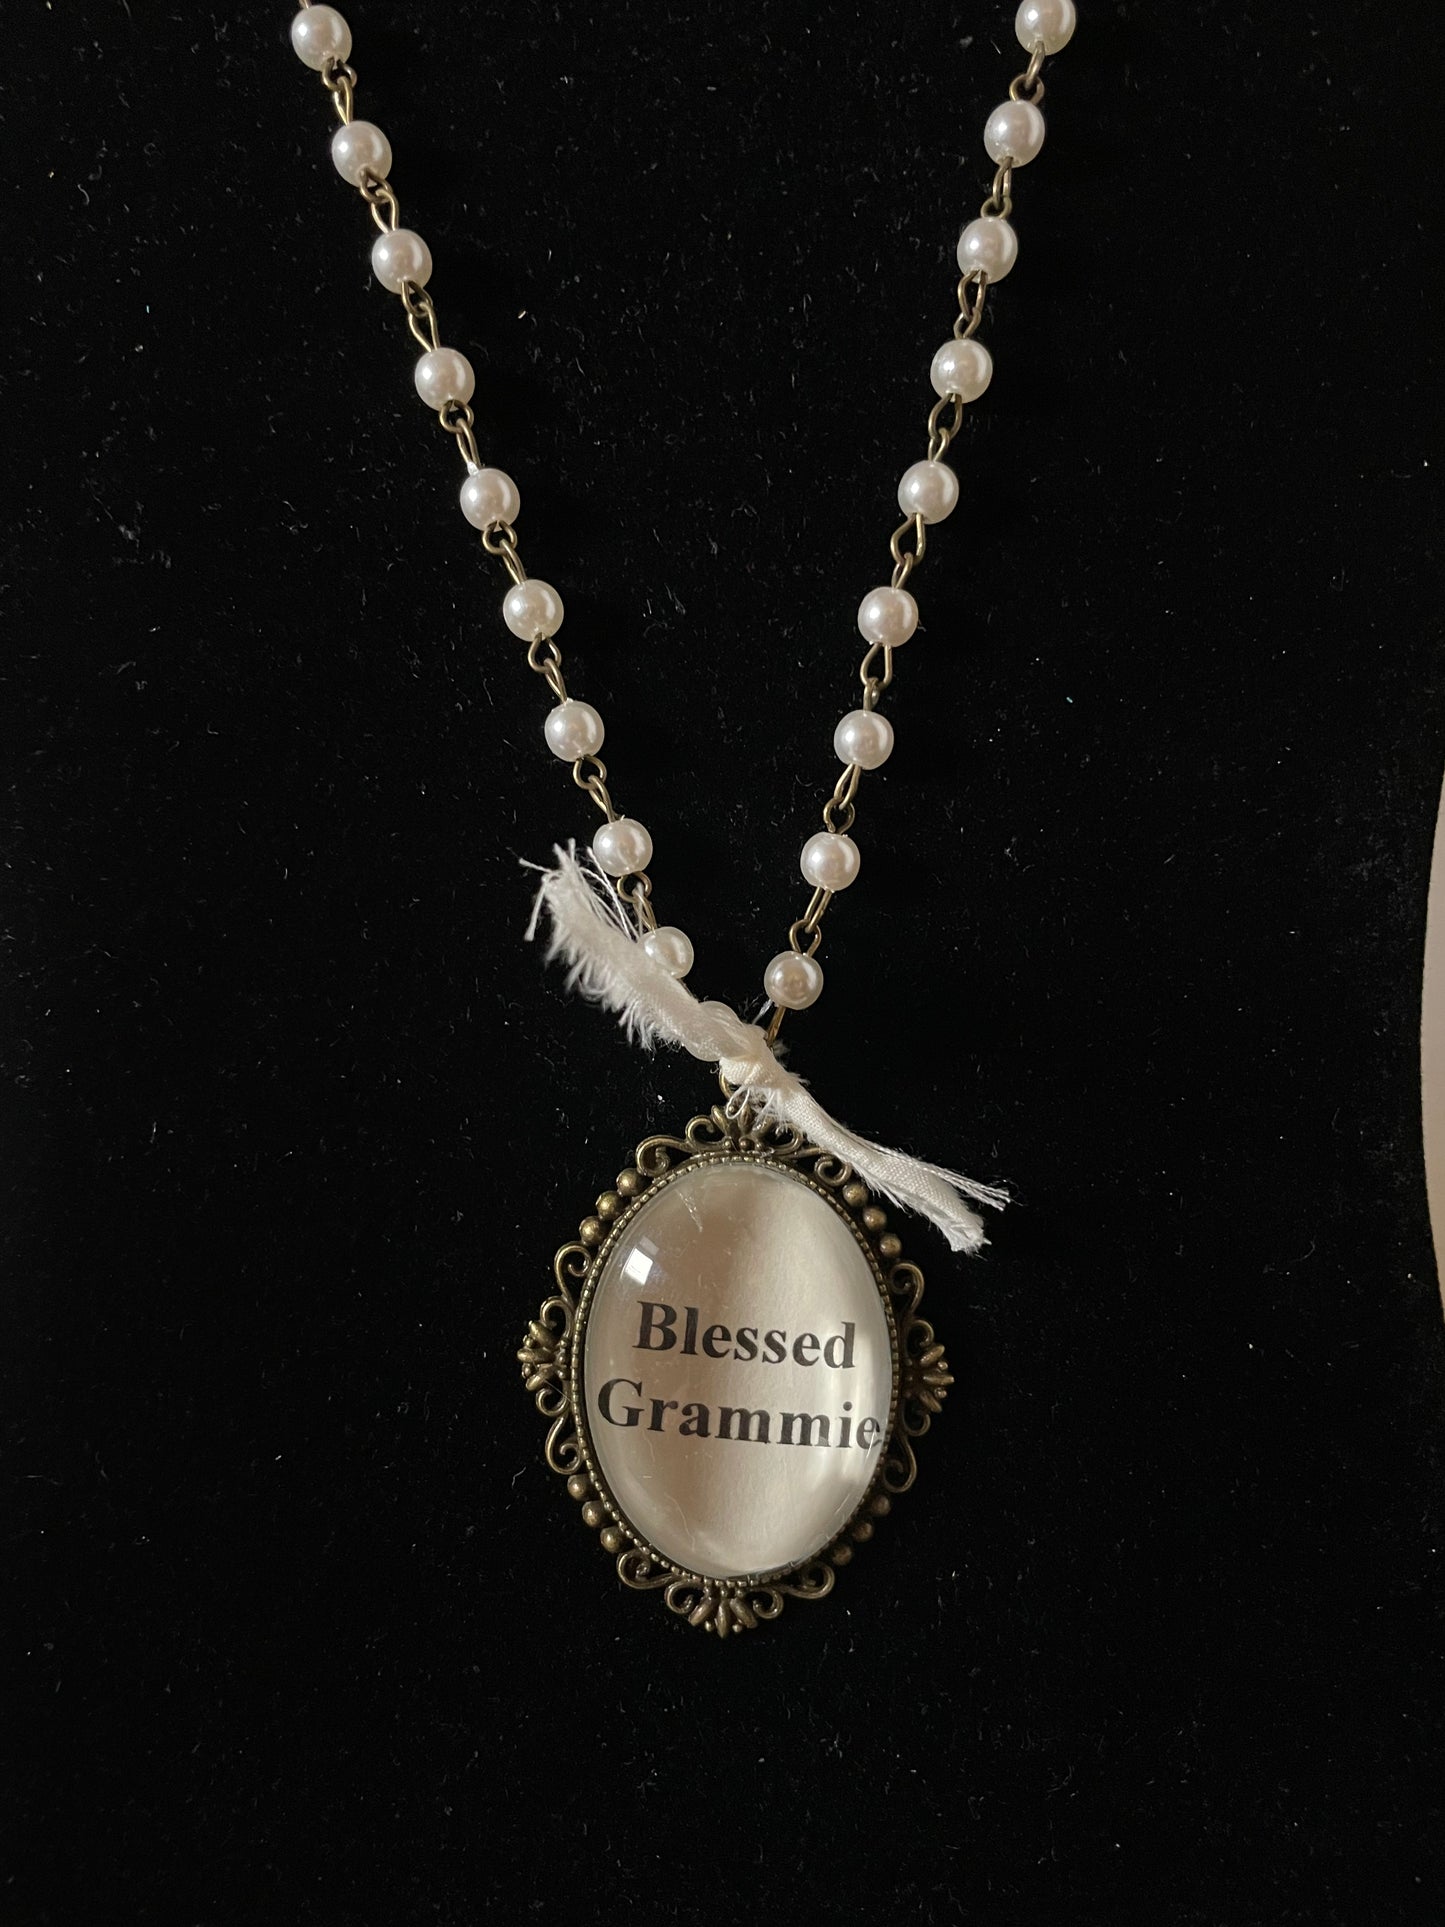 Blessed Grammie Necklace